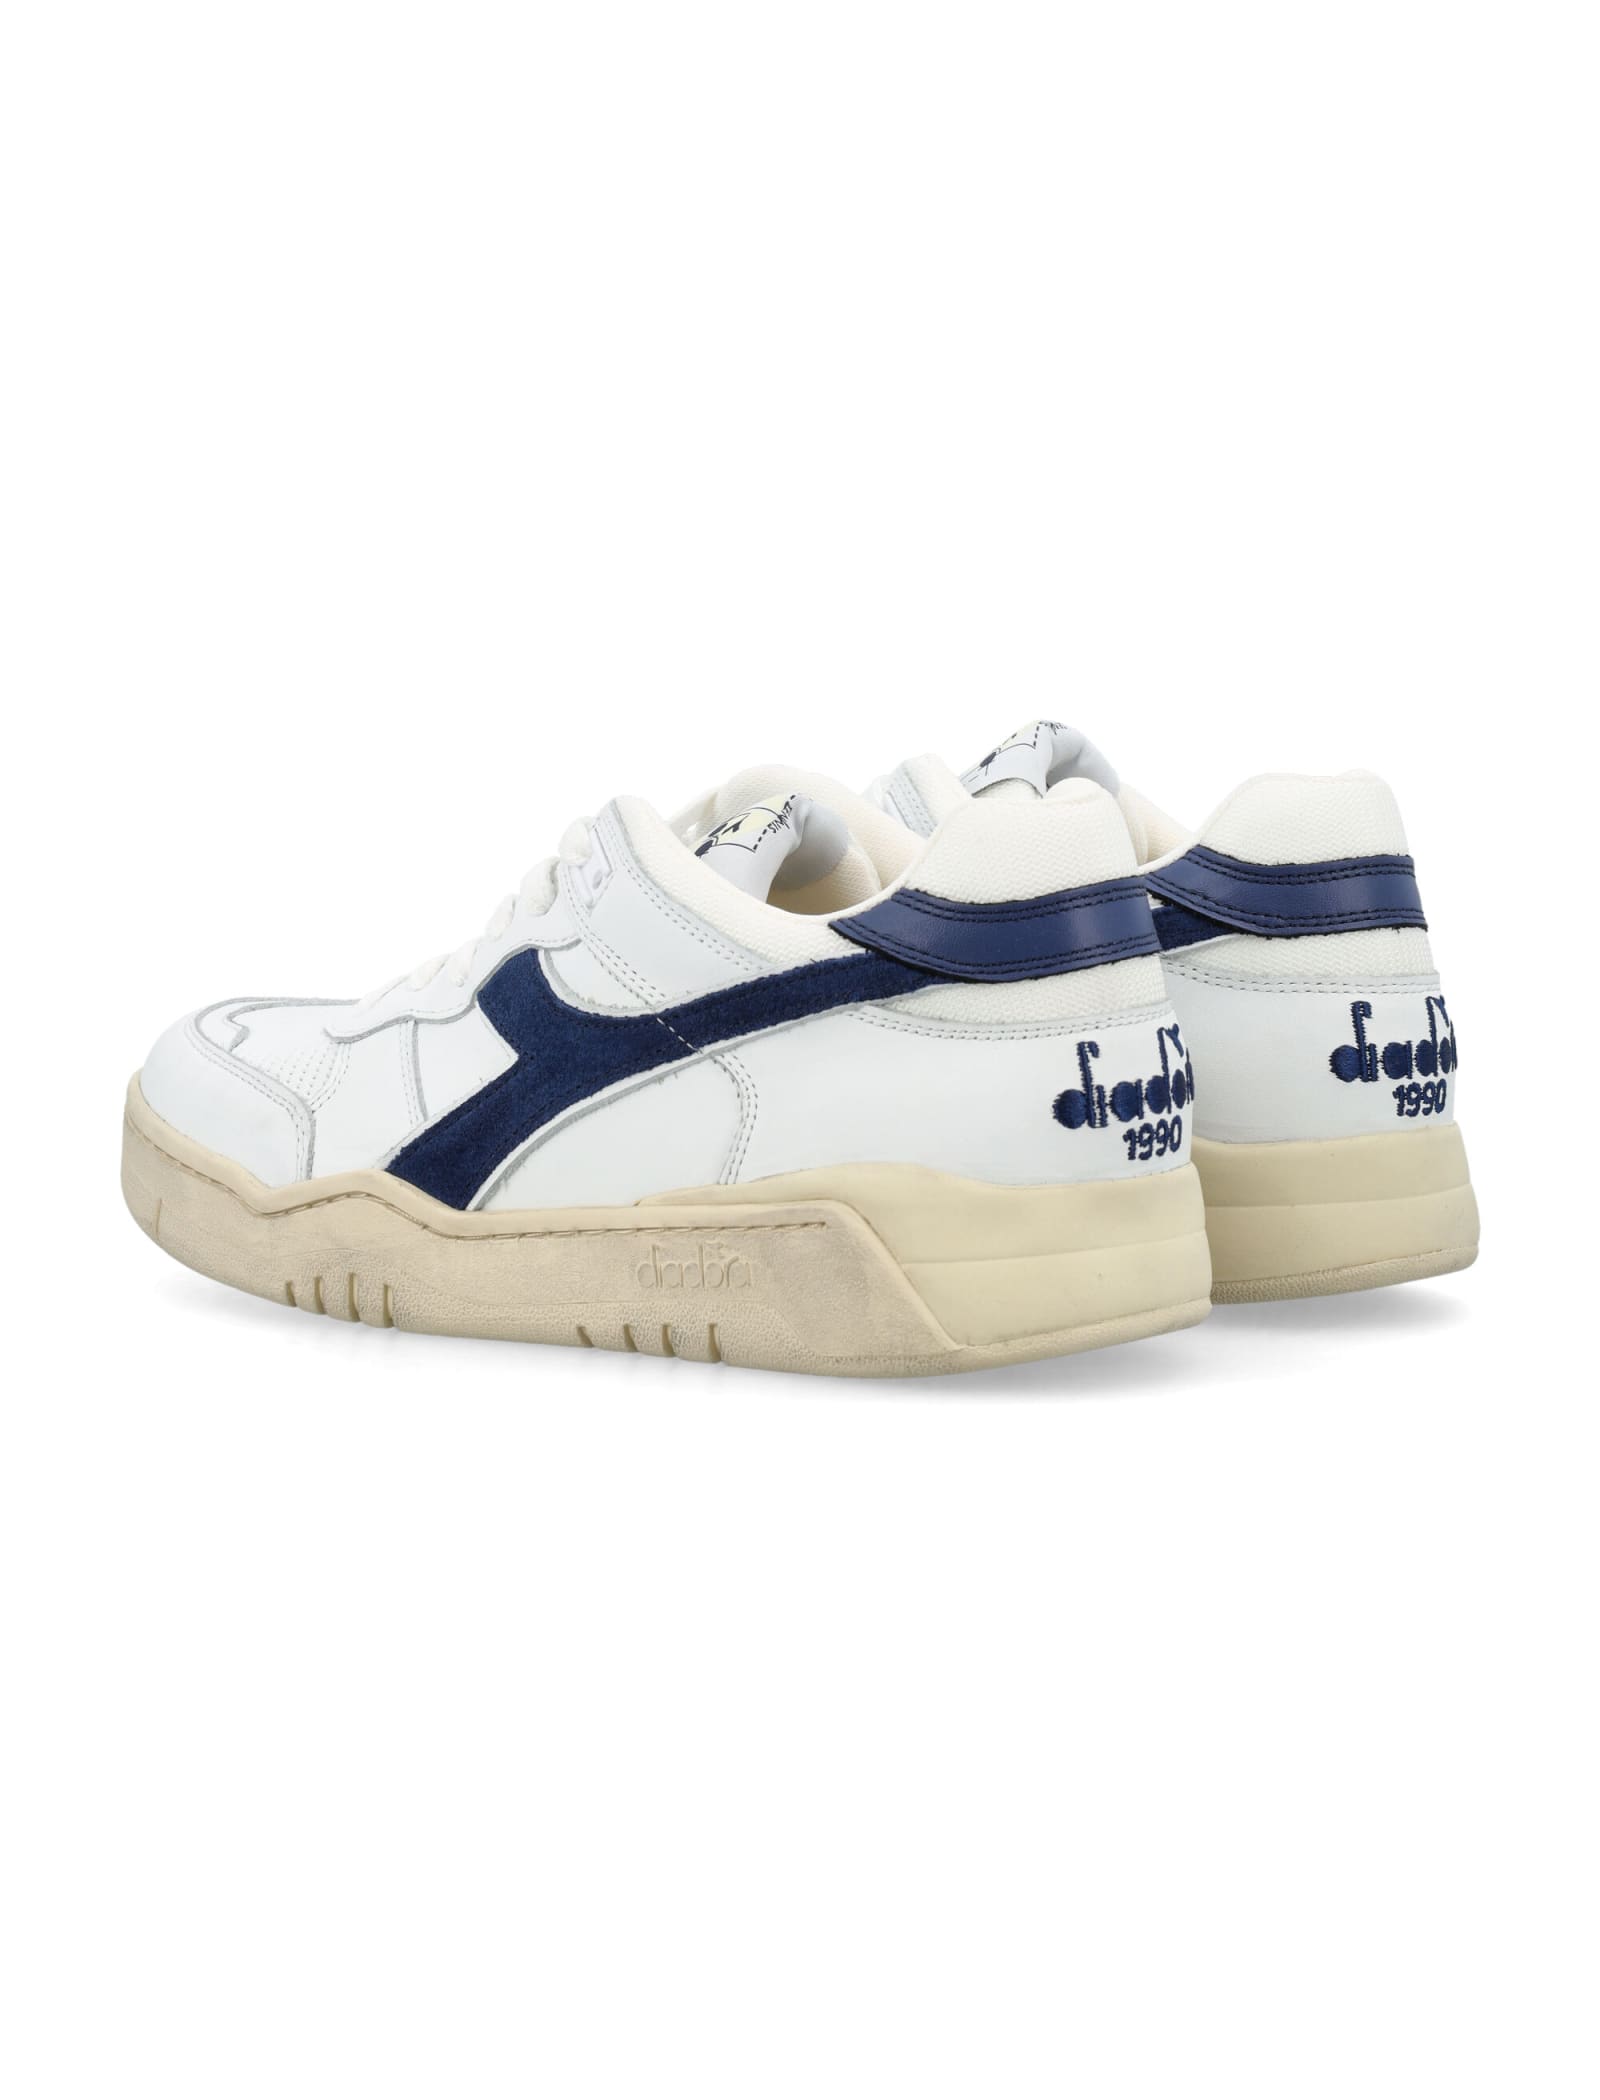 Shop Diadora B.560 Used Sneakers In White/blue